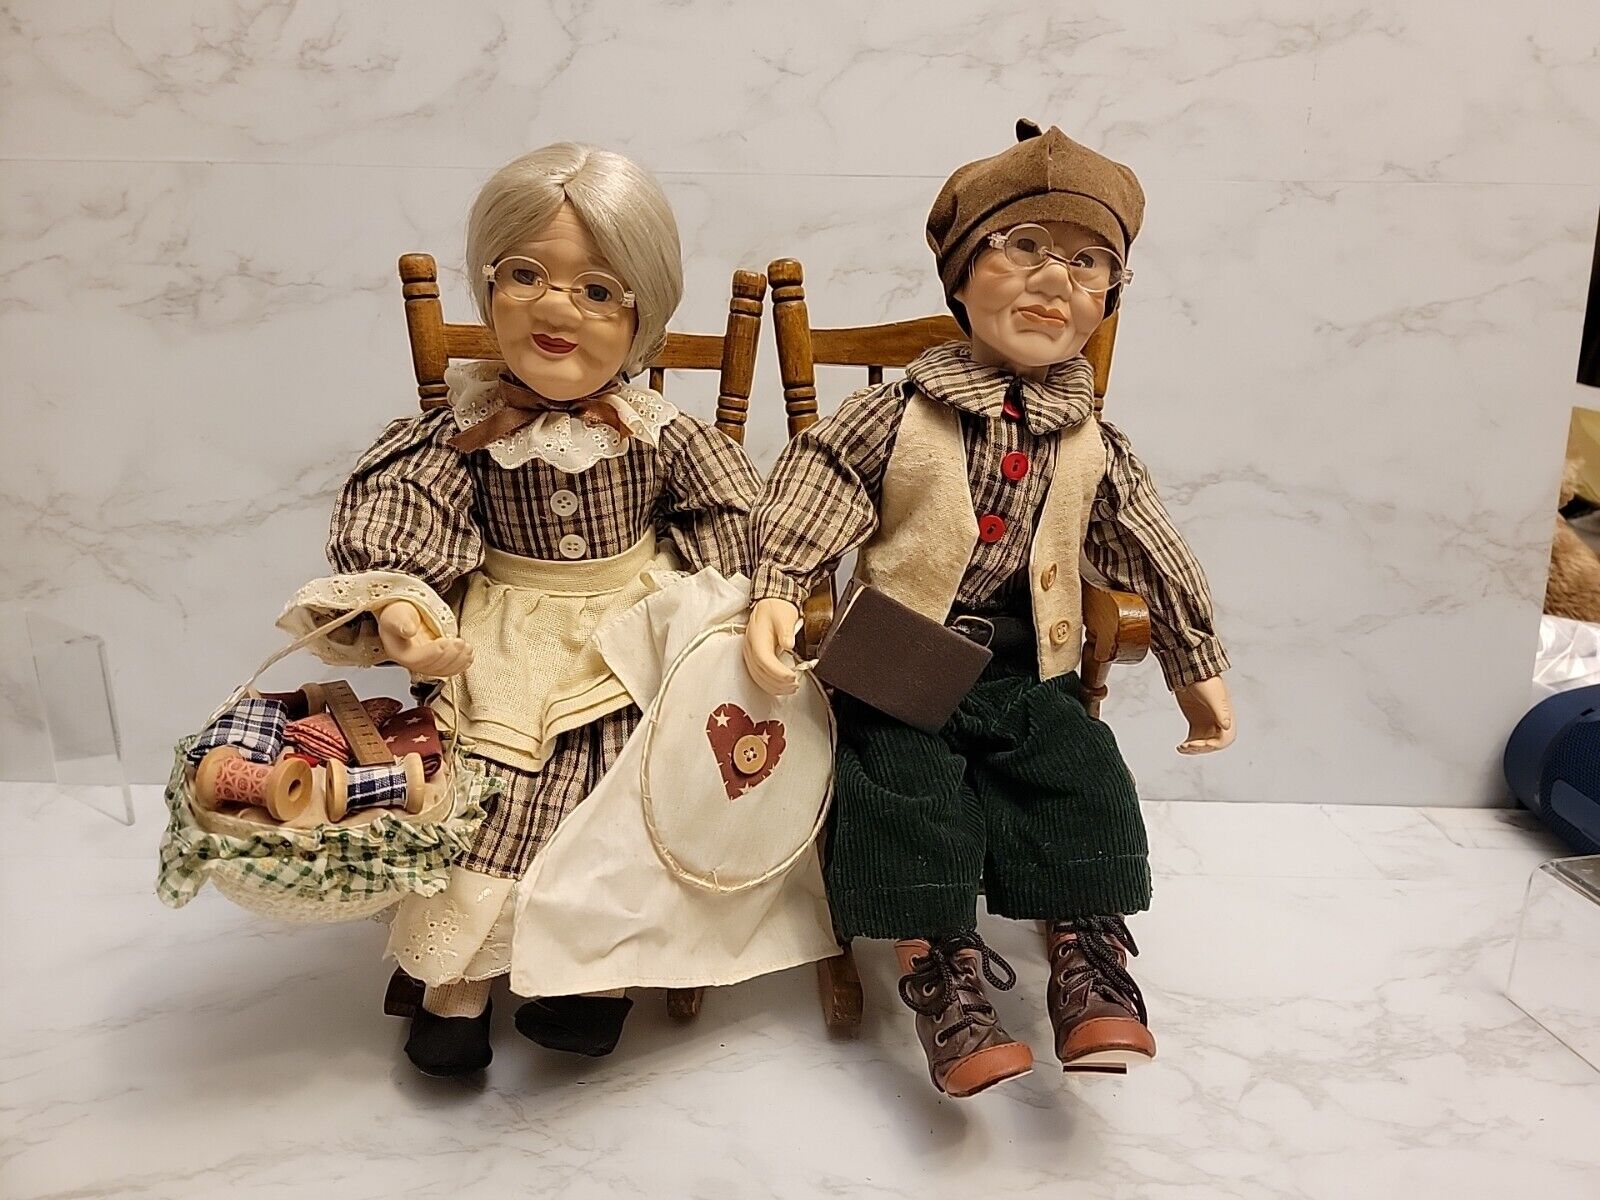 Vintage Grandma And Grandpa Porcelain Dolls In Wooden Rocking Chairs PRISTINE 